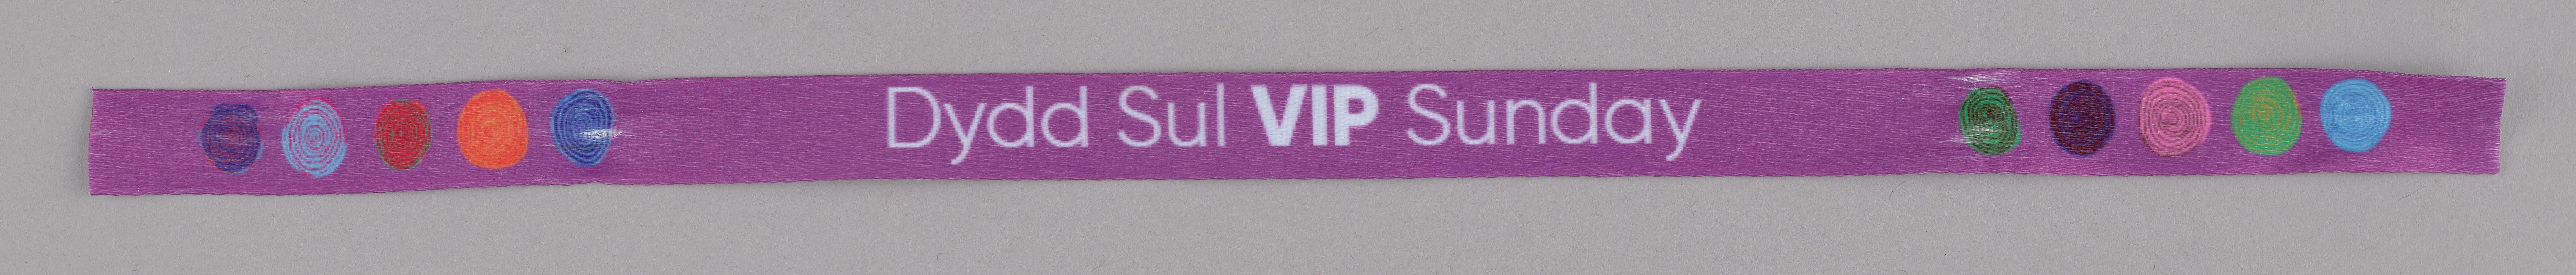 Wristband &#039;Dydd Sul VIP Sunday&#039;. Used for access to VIP area at Pride Cymru, Cardiff, Sunday 27 August 2022.